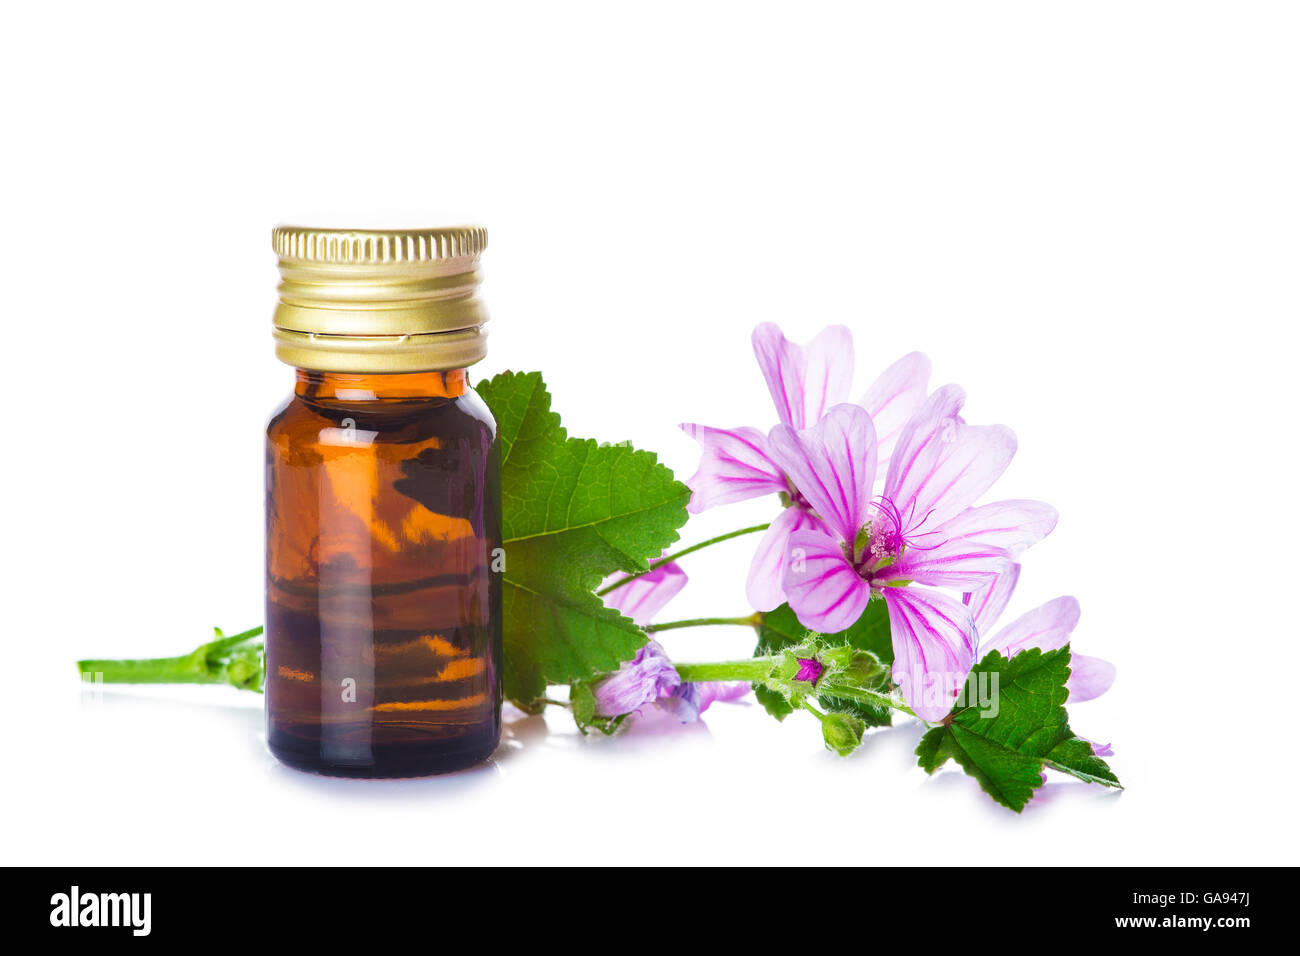 Mallow extrac or essential oil in a little jar with malva flowers isolated on a white background Stock Photo